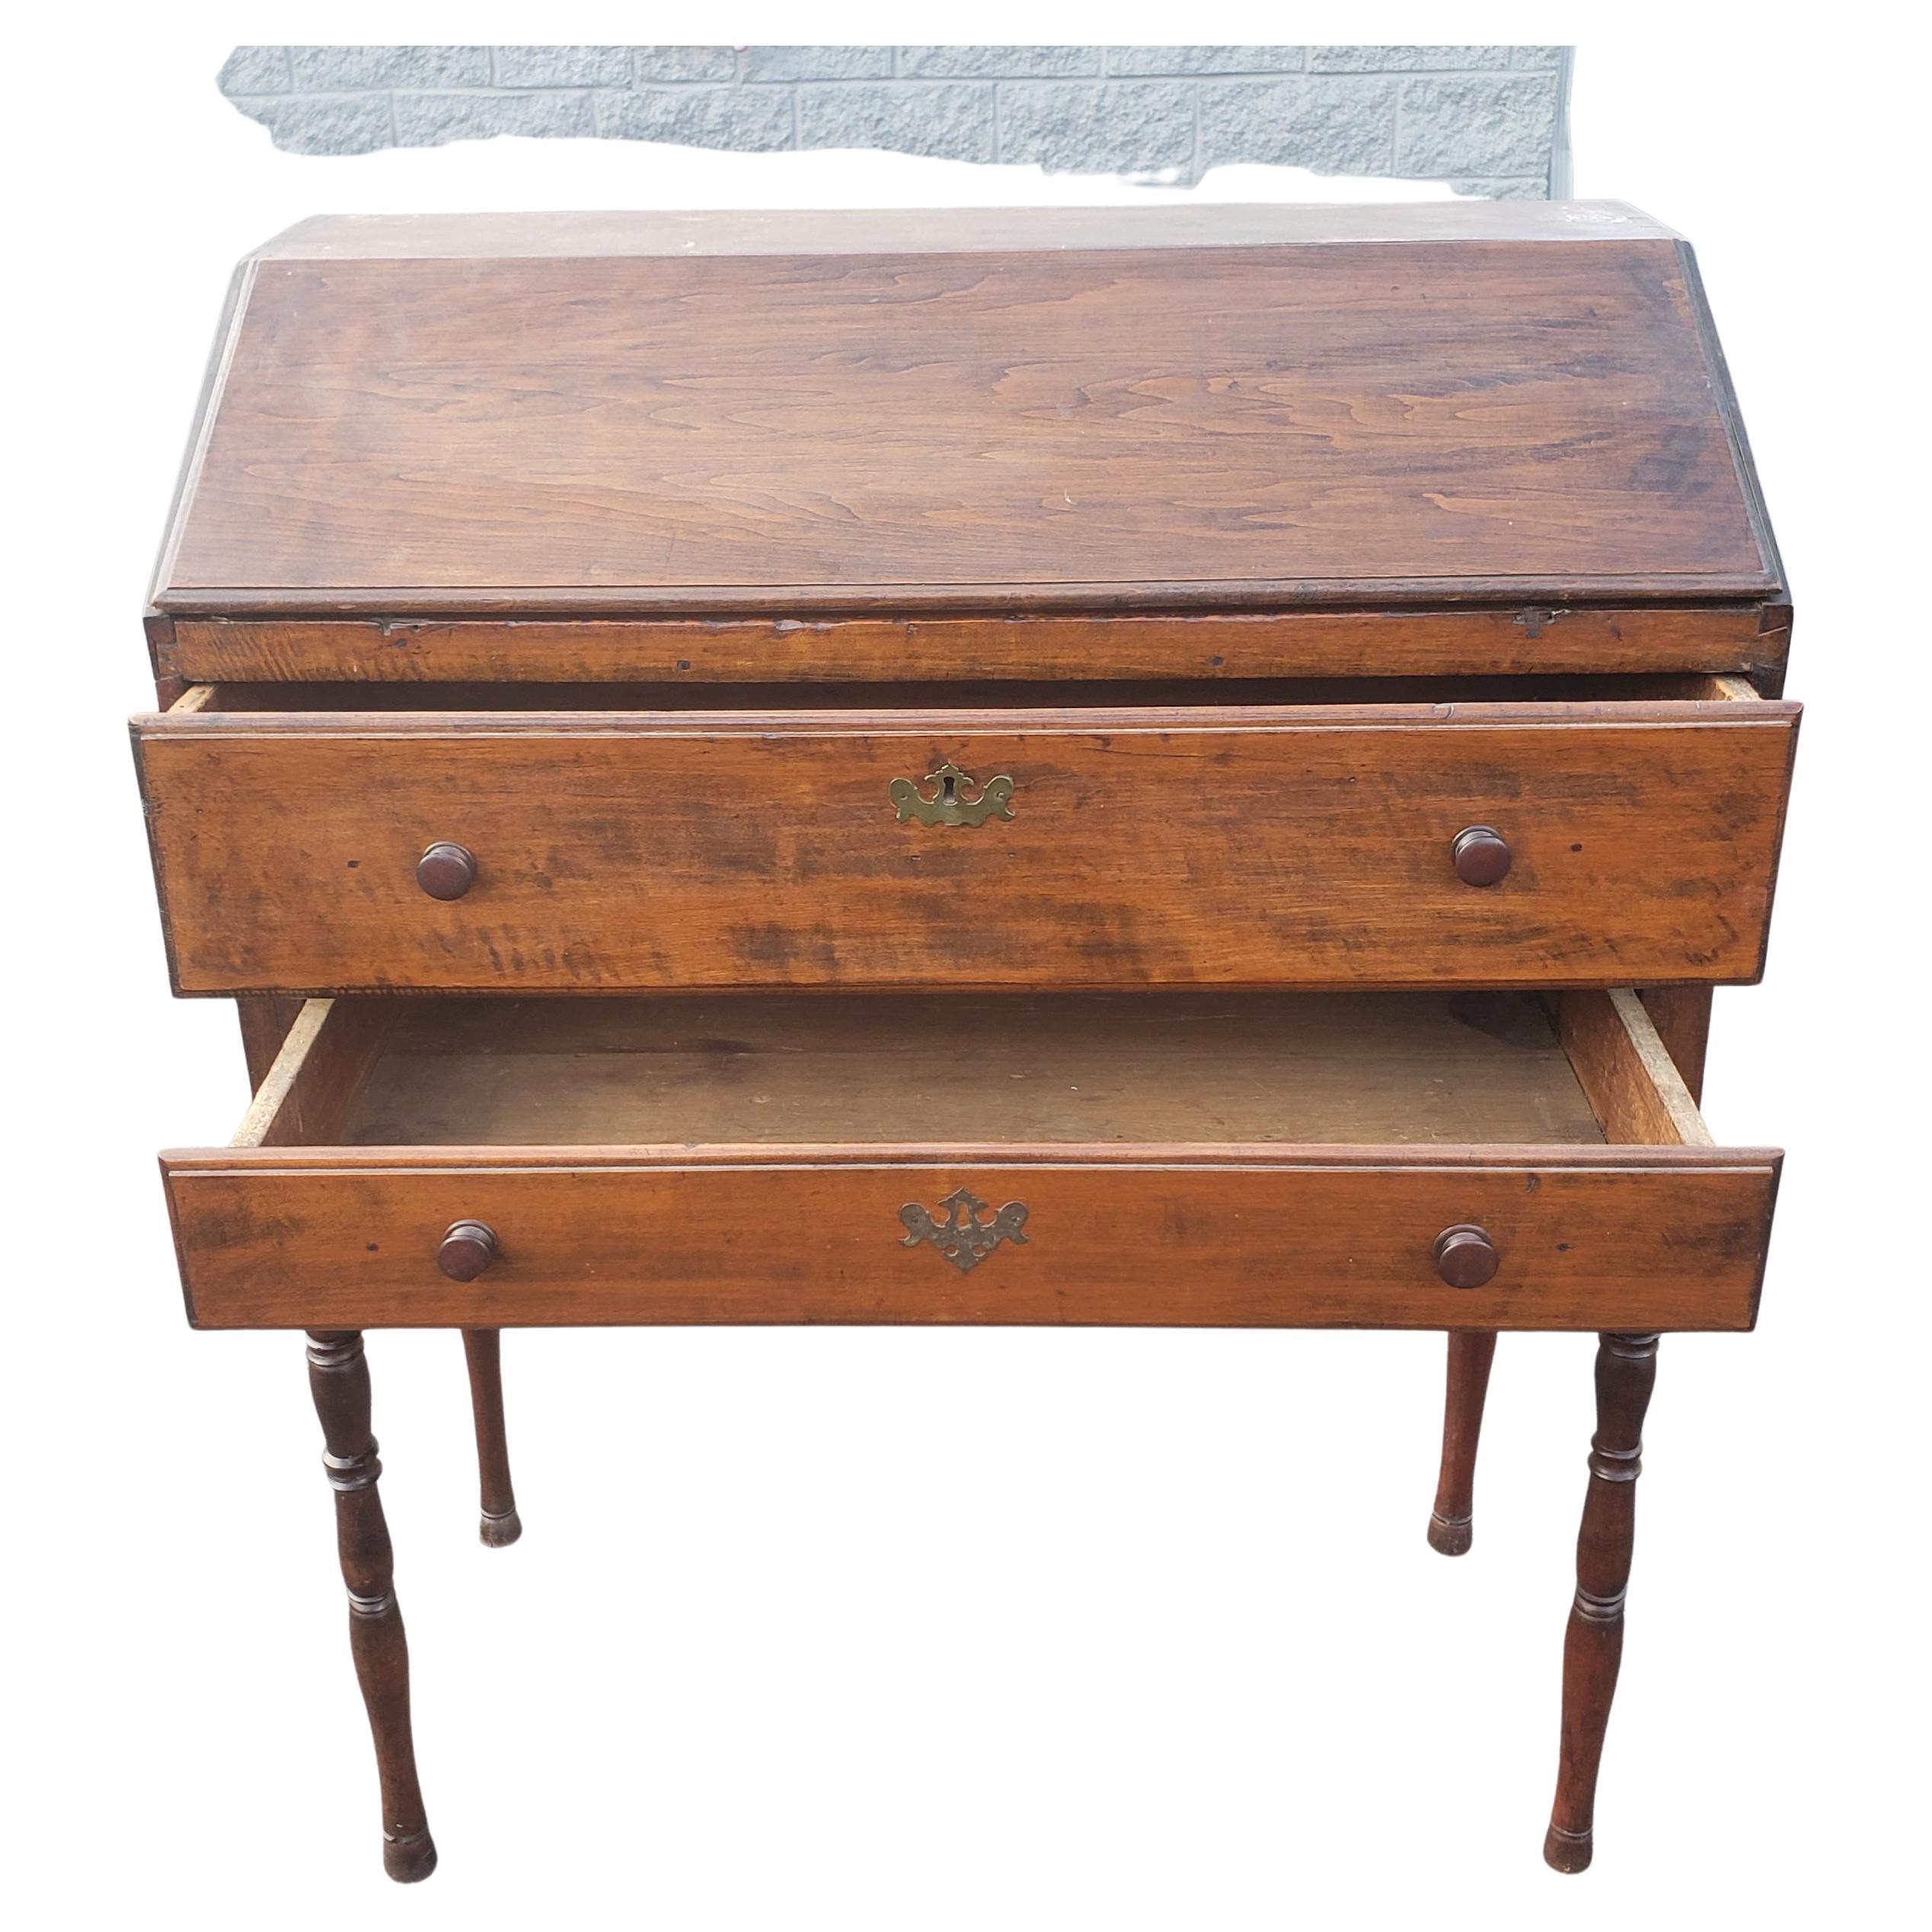 1800s Hancrafted Tall Slant Top Secretary Desk In Good Condition For Sale In Germantown, MD